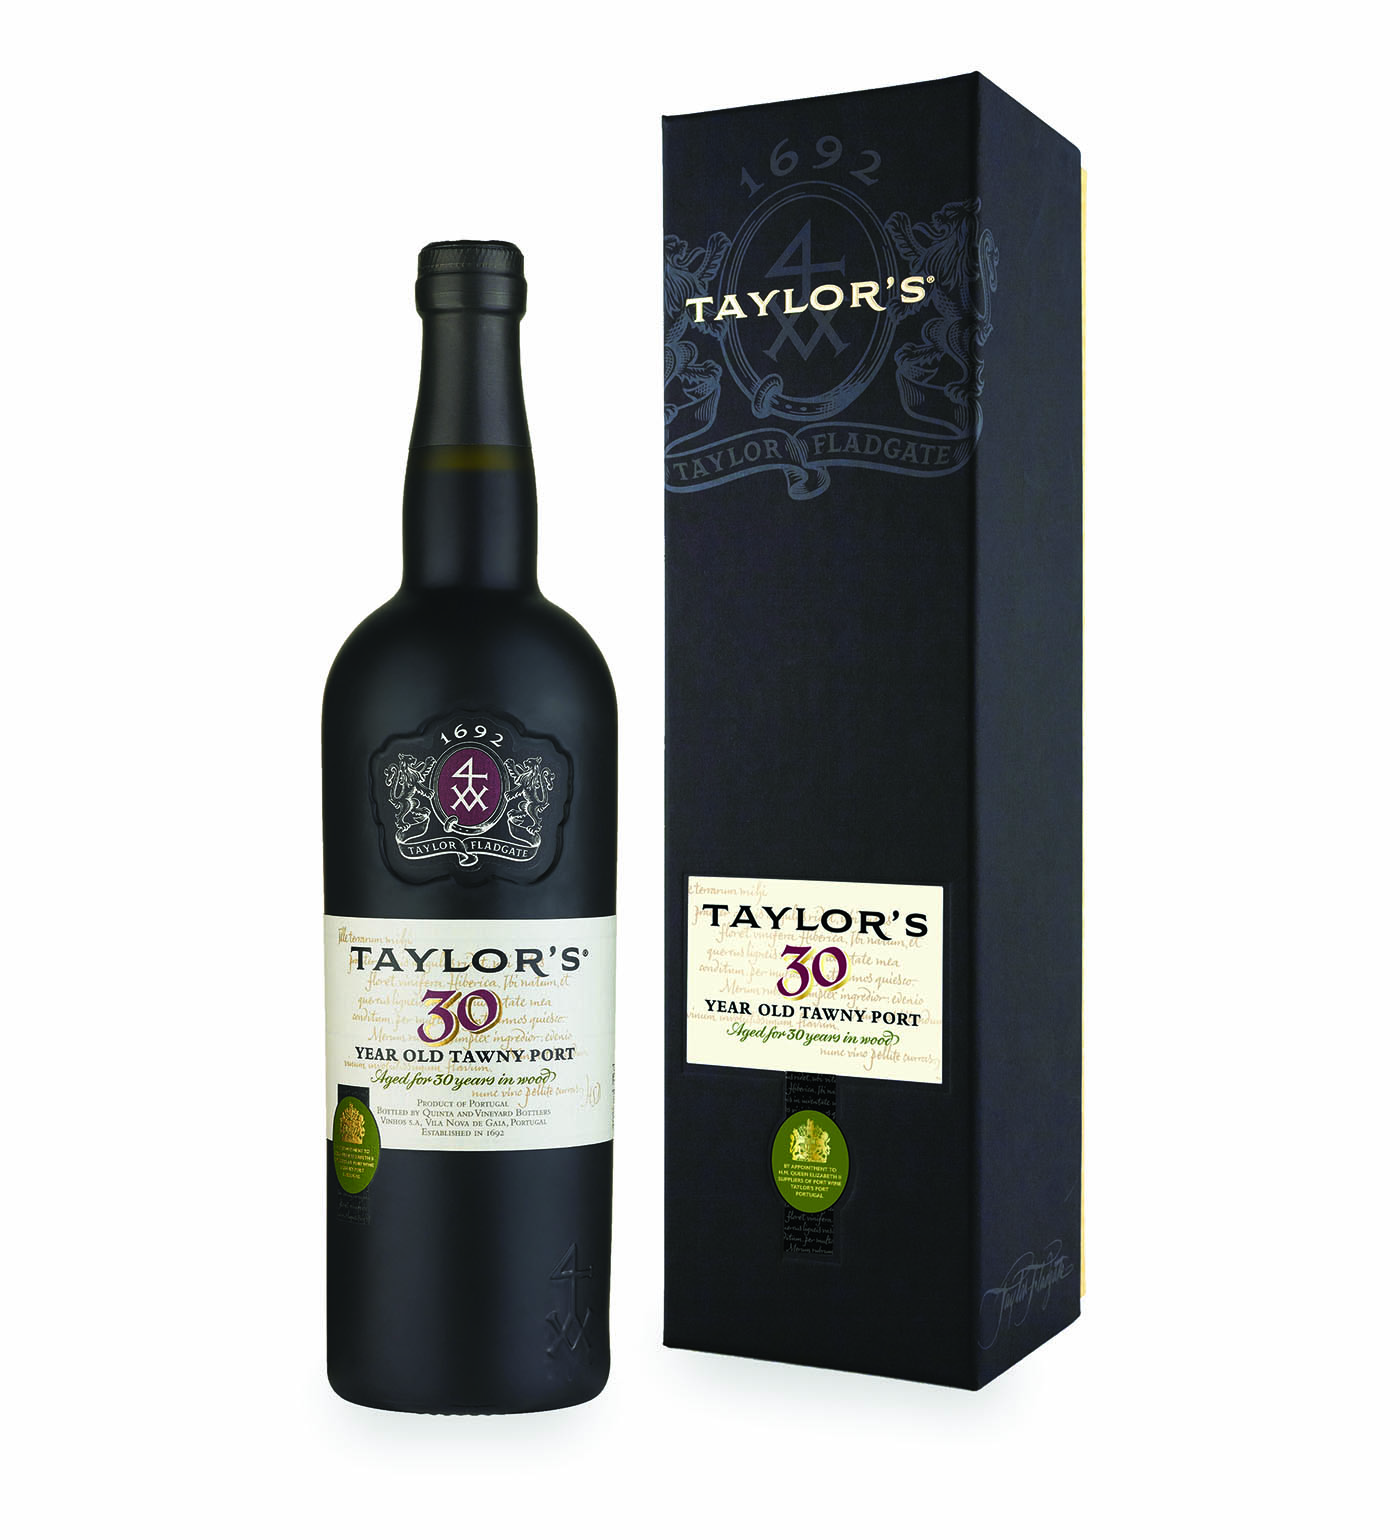 Taylor's Port 30 year old Tawny in wooden box